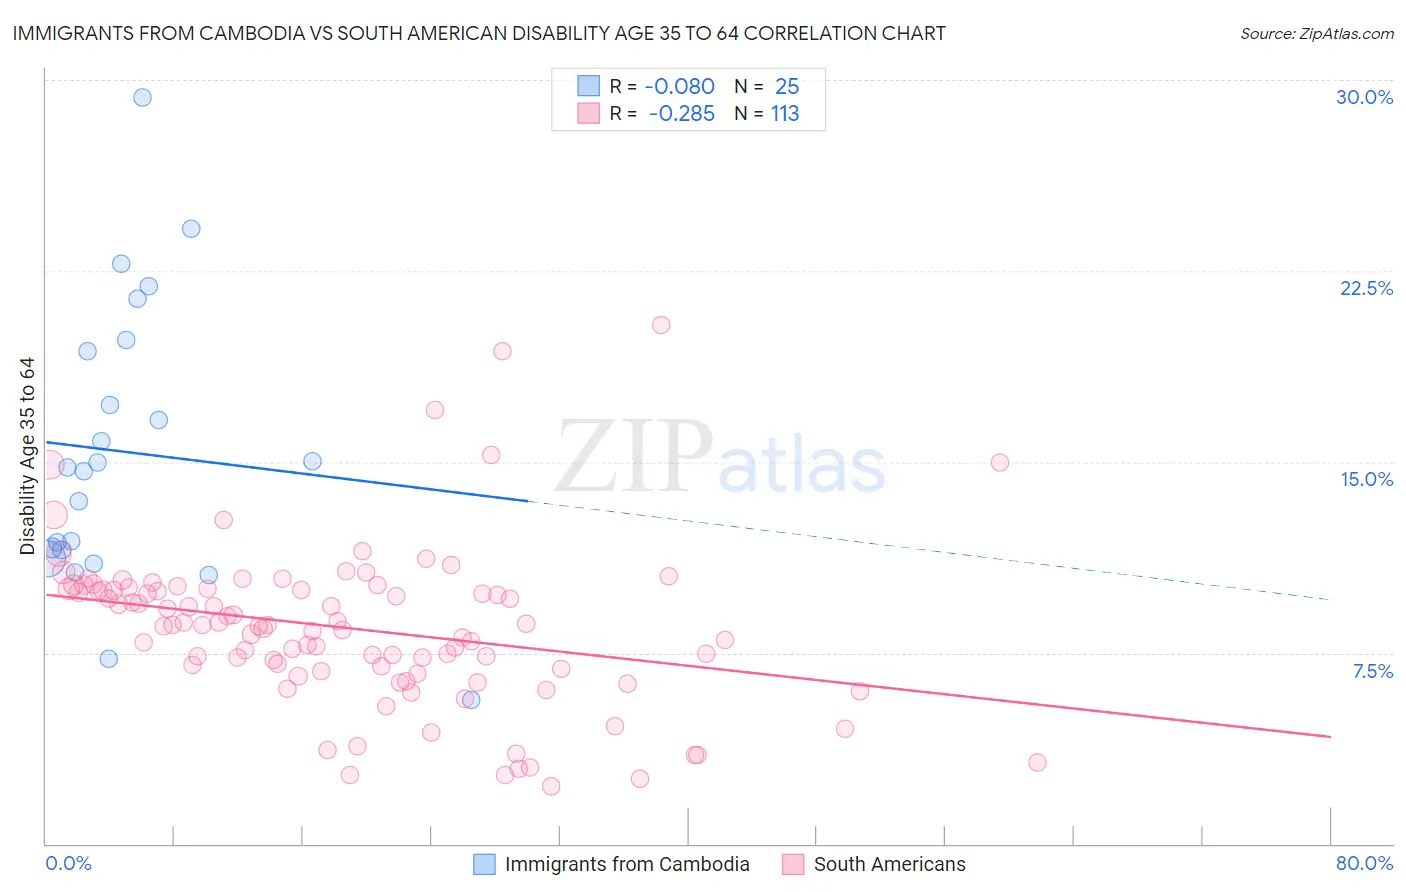 Immigrants from Cambodia vs South American Disability Age 35 to 64